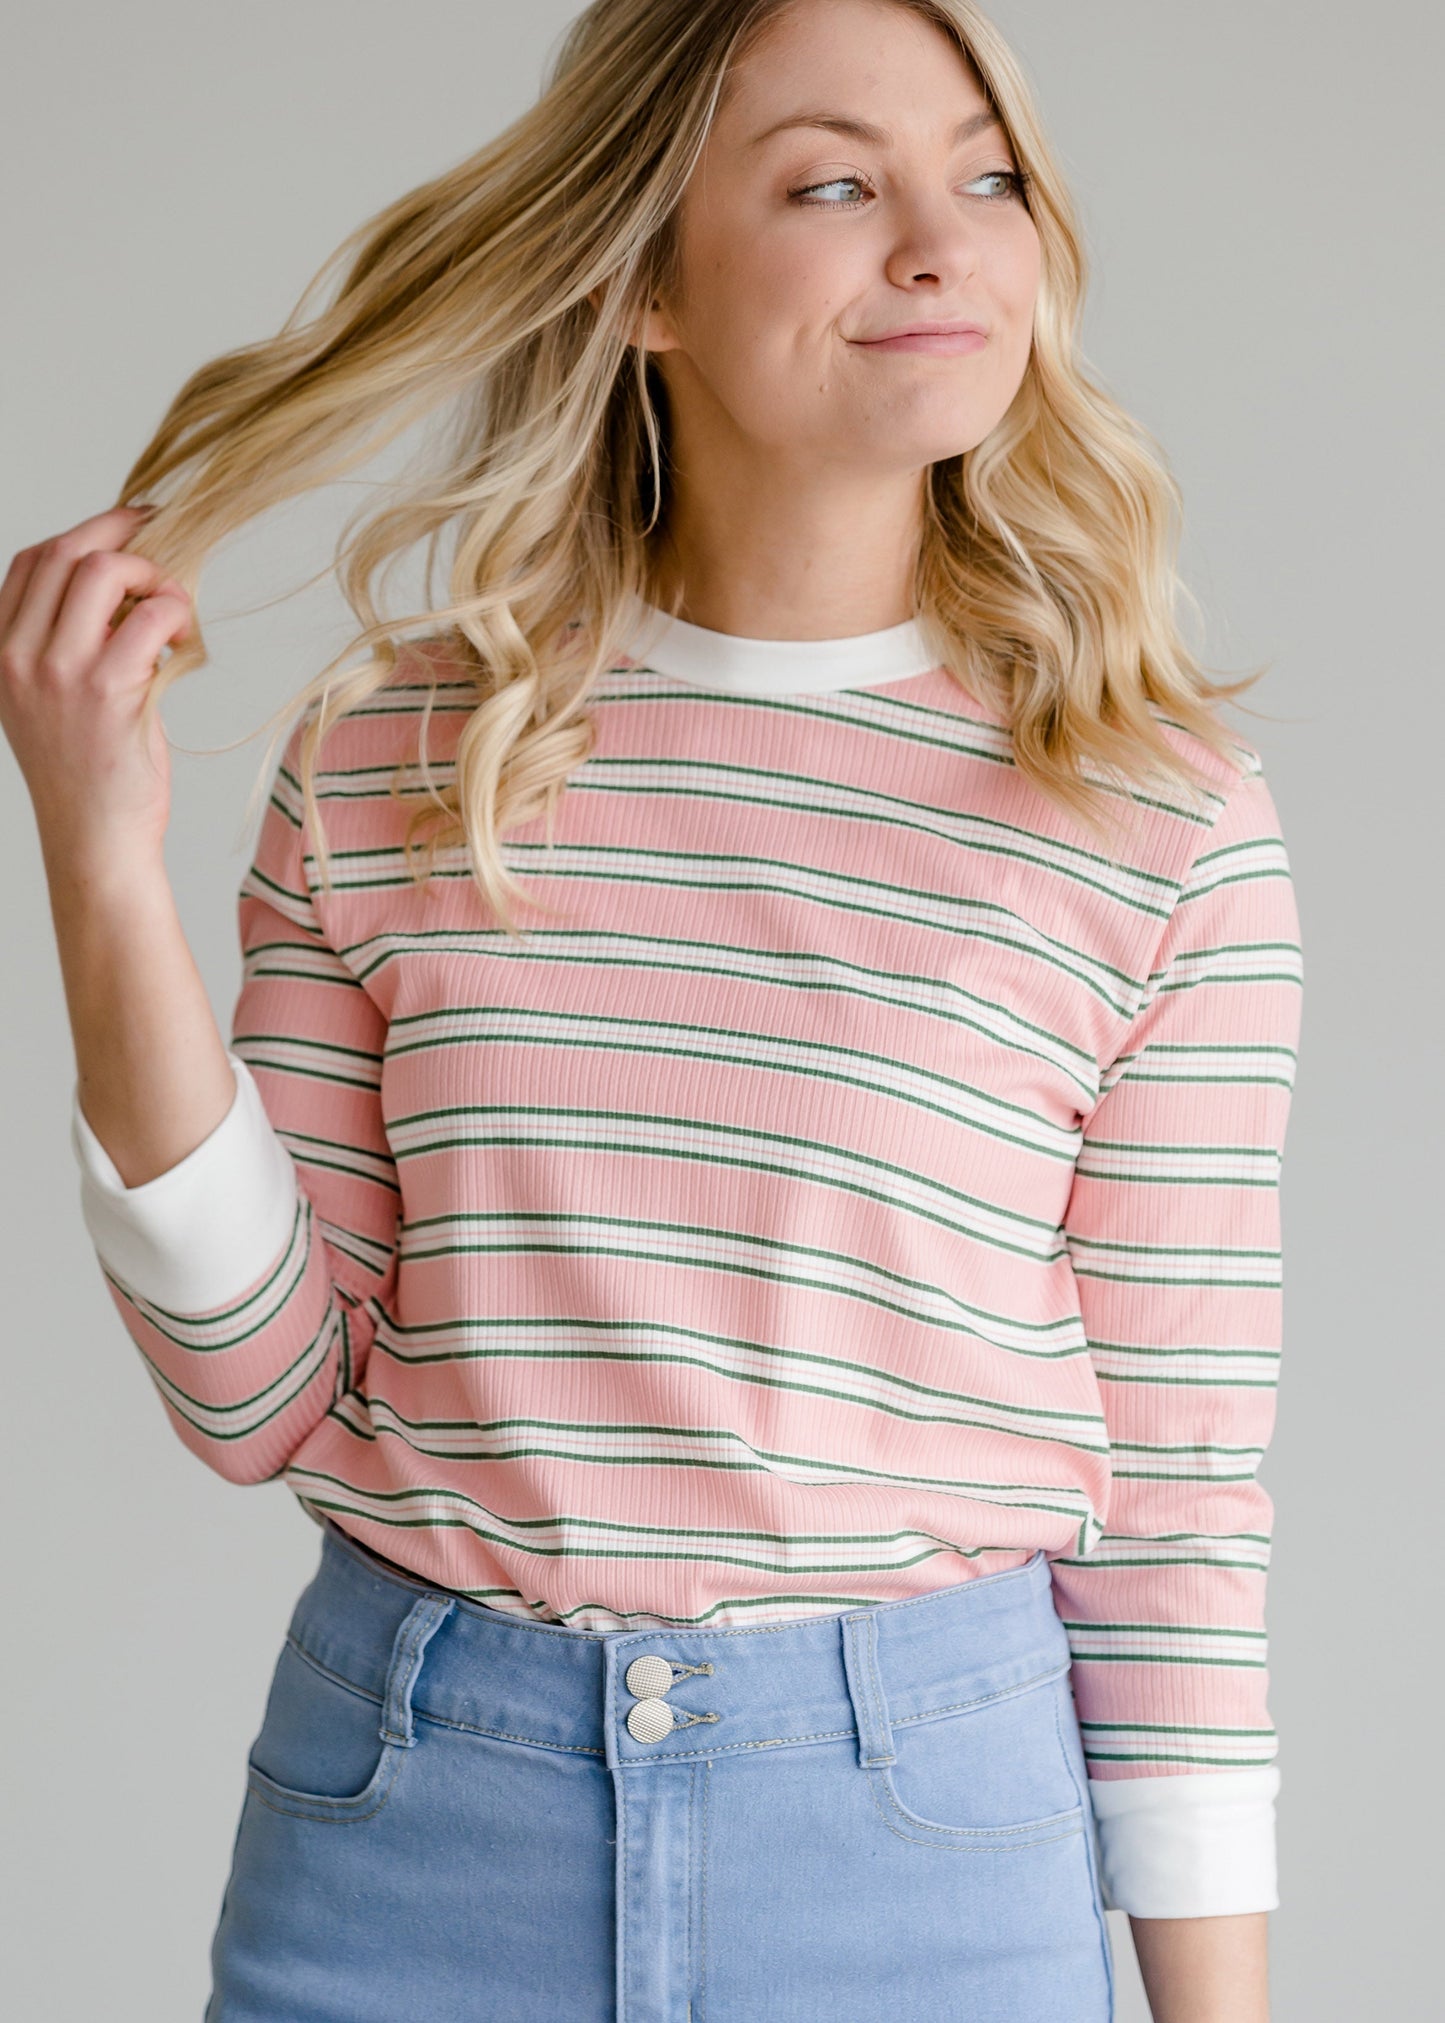 Striped 3/4 Sleeve Casual Top - FINAL SALE Tops